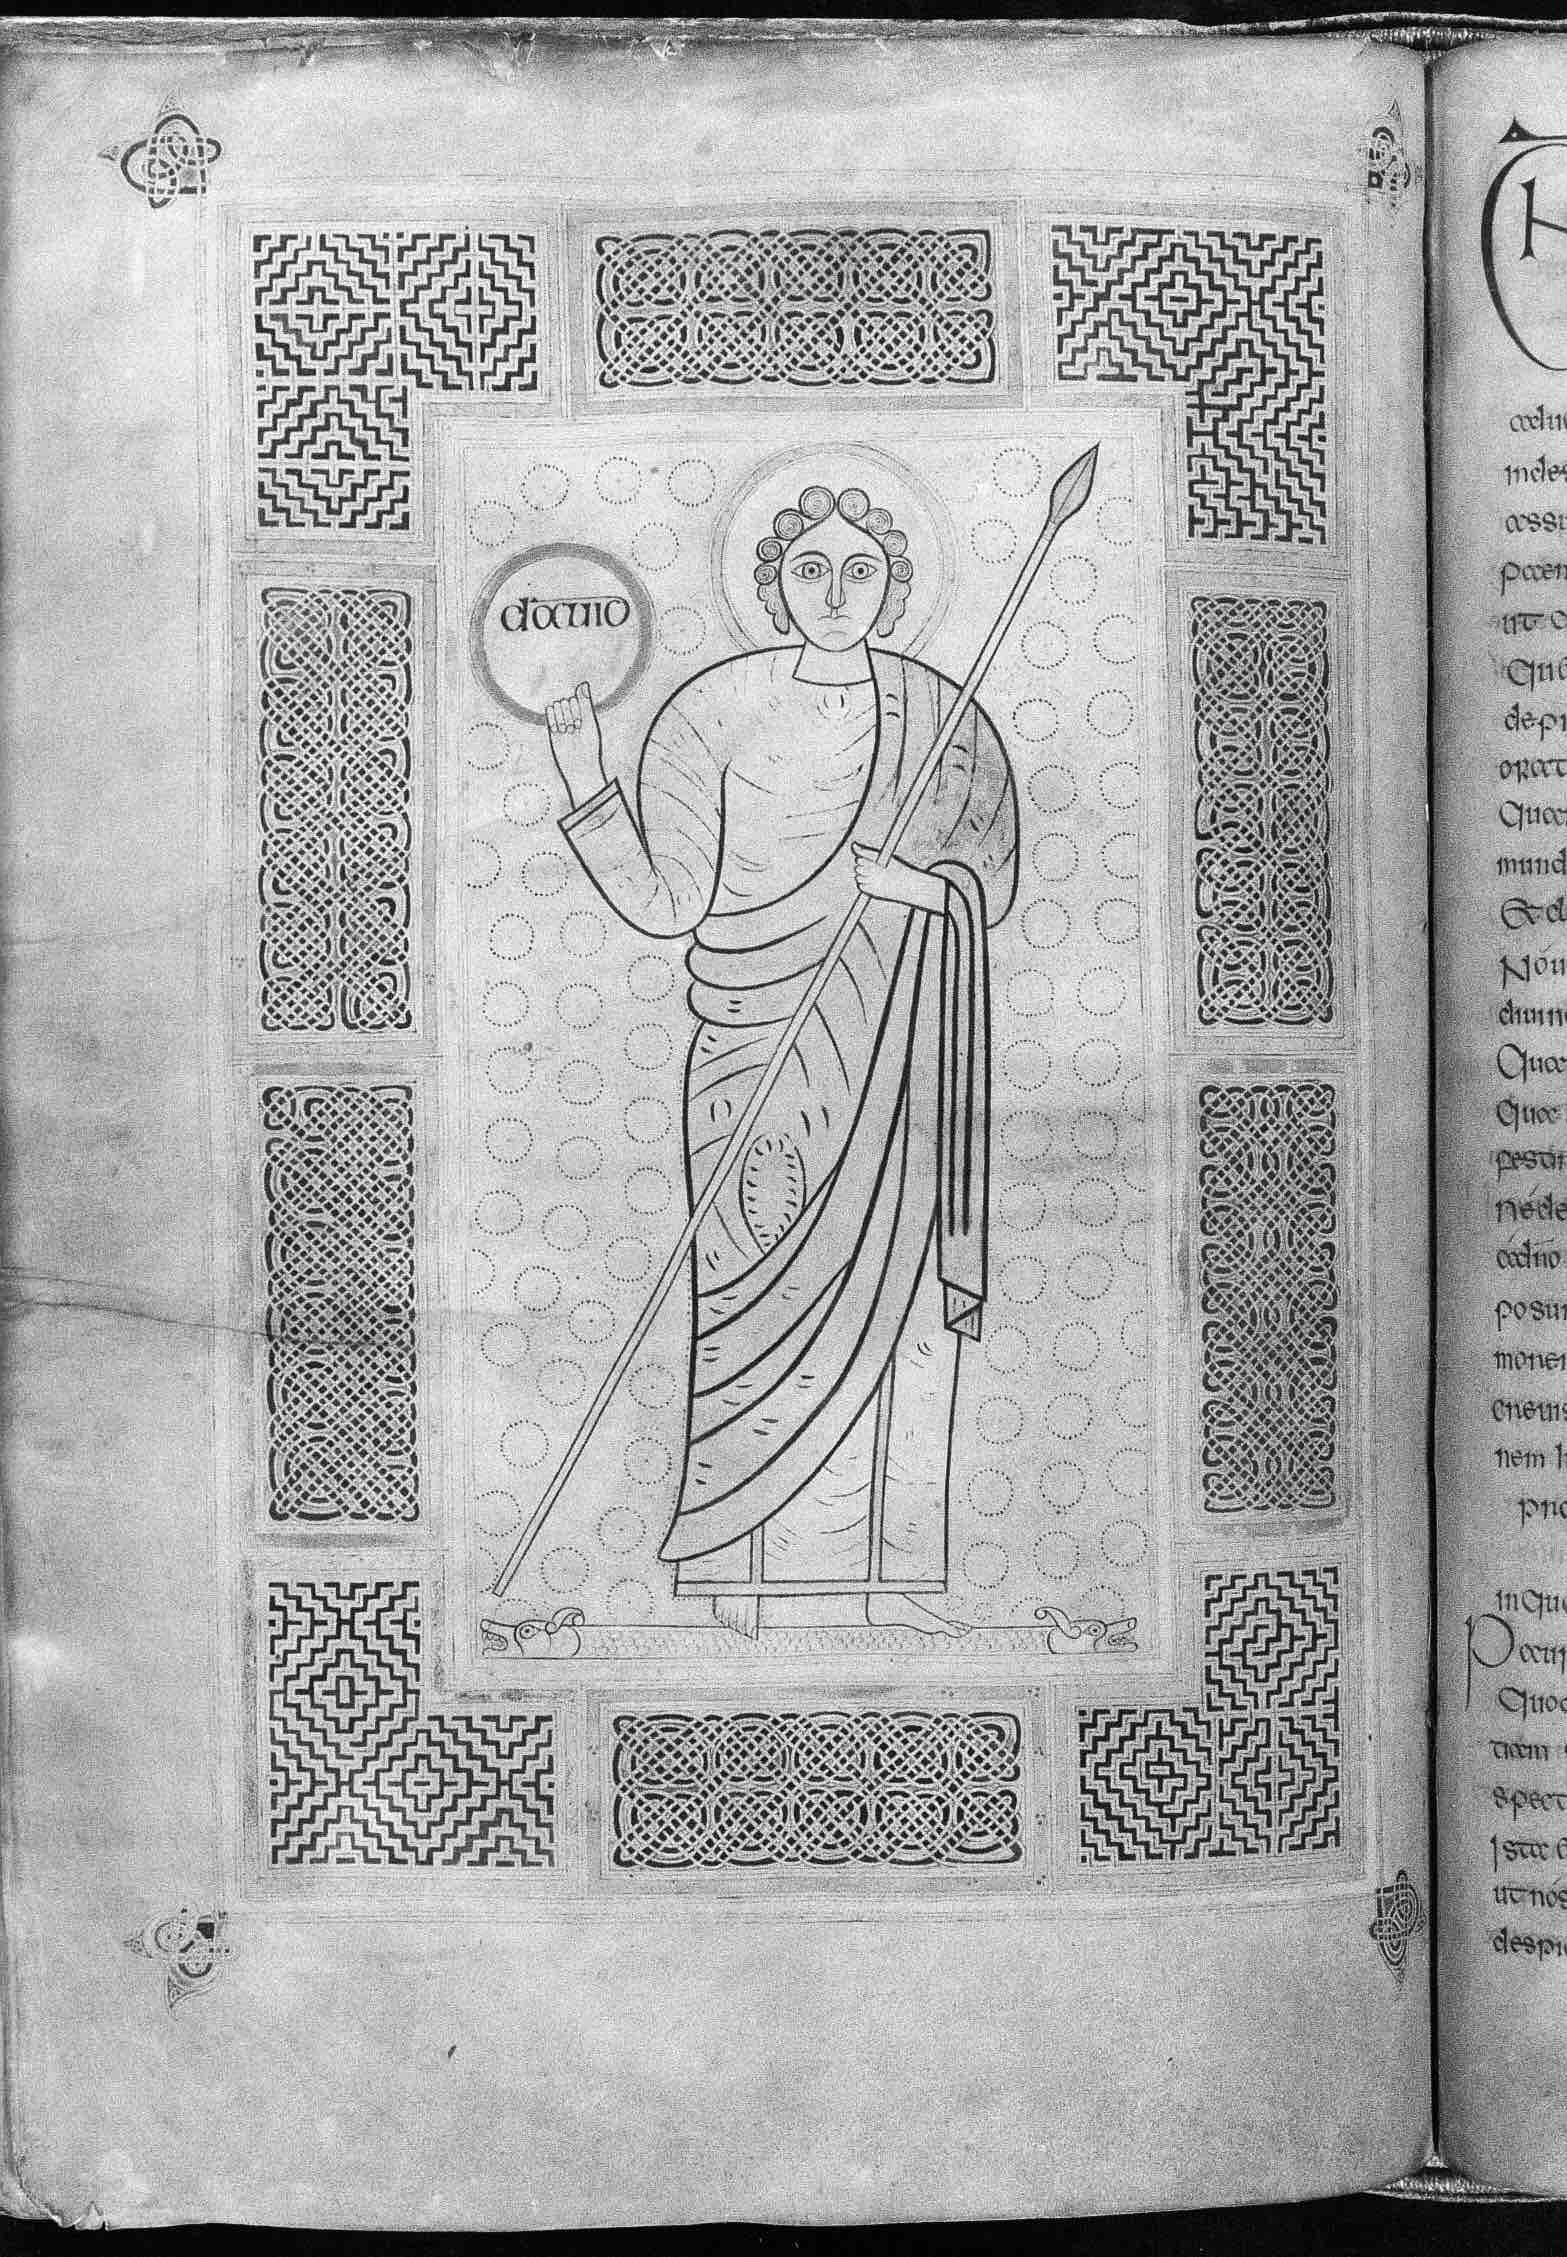 Cassiodorus, Exposition on the Psalms, 8th-c., Durham Cathedral Library (<a href='https://w3id.org/vhmml/readingRoom/view/80092'>England 191</a>)